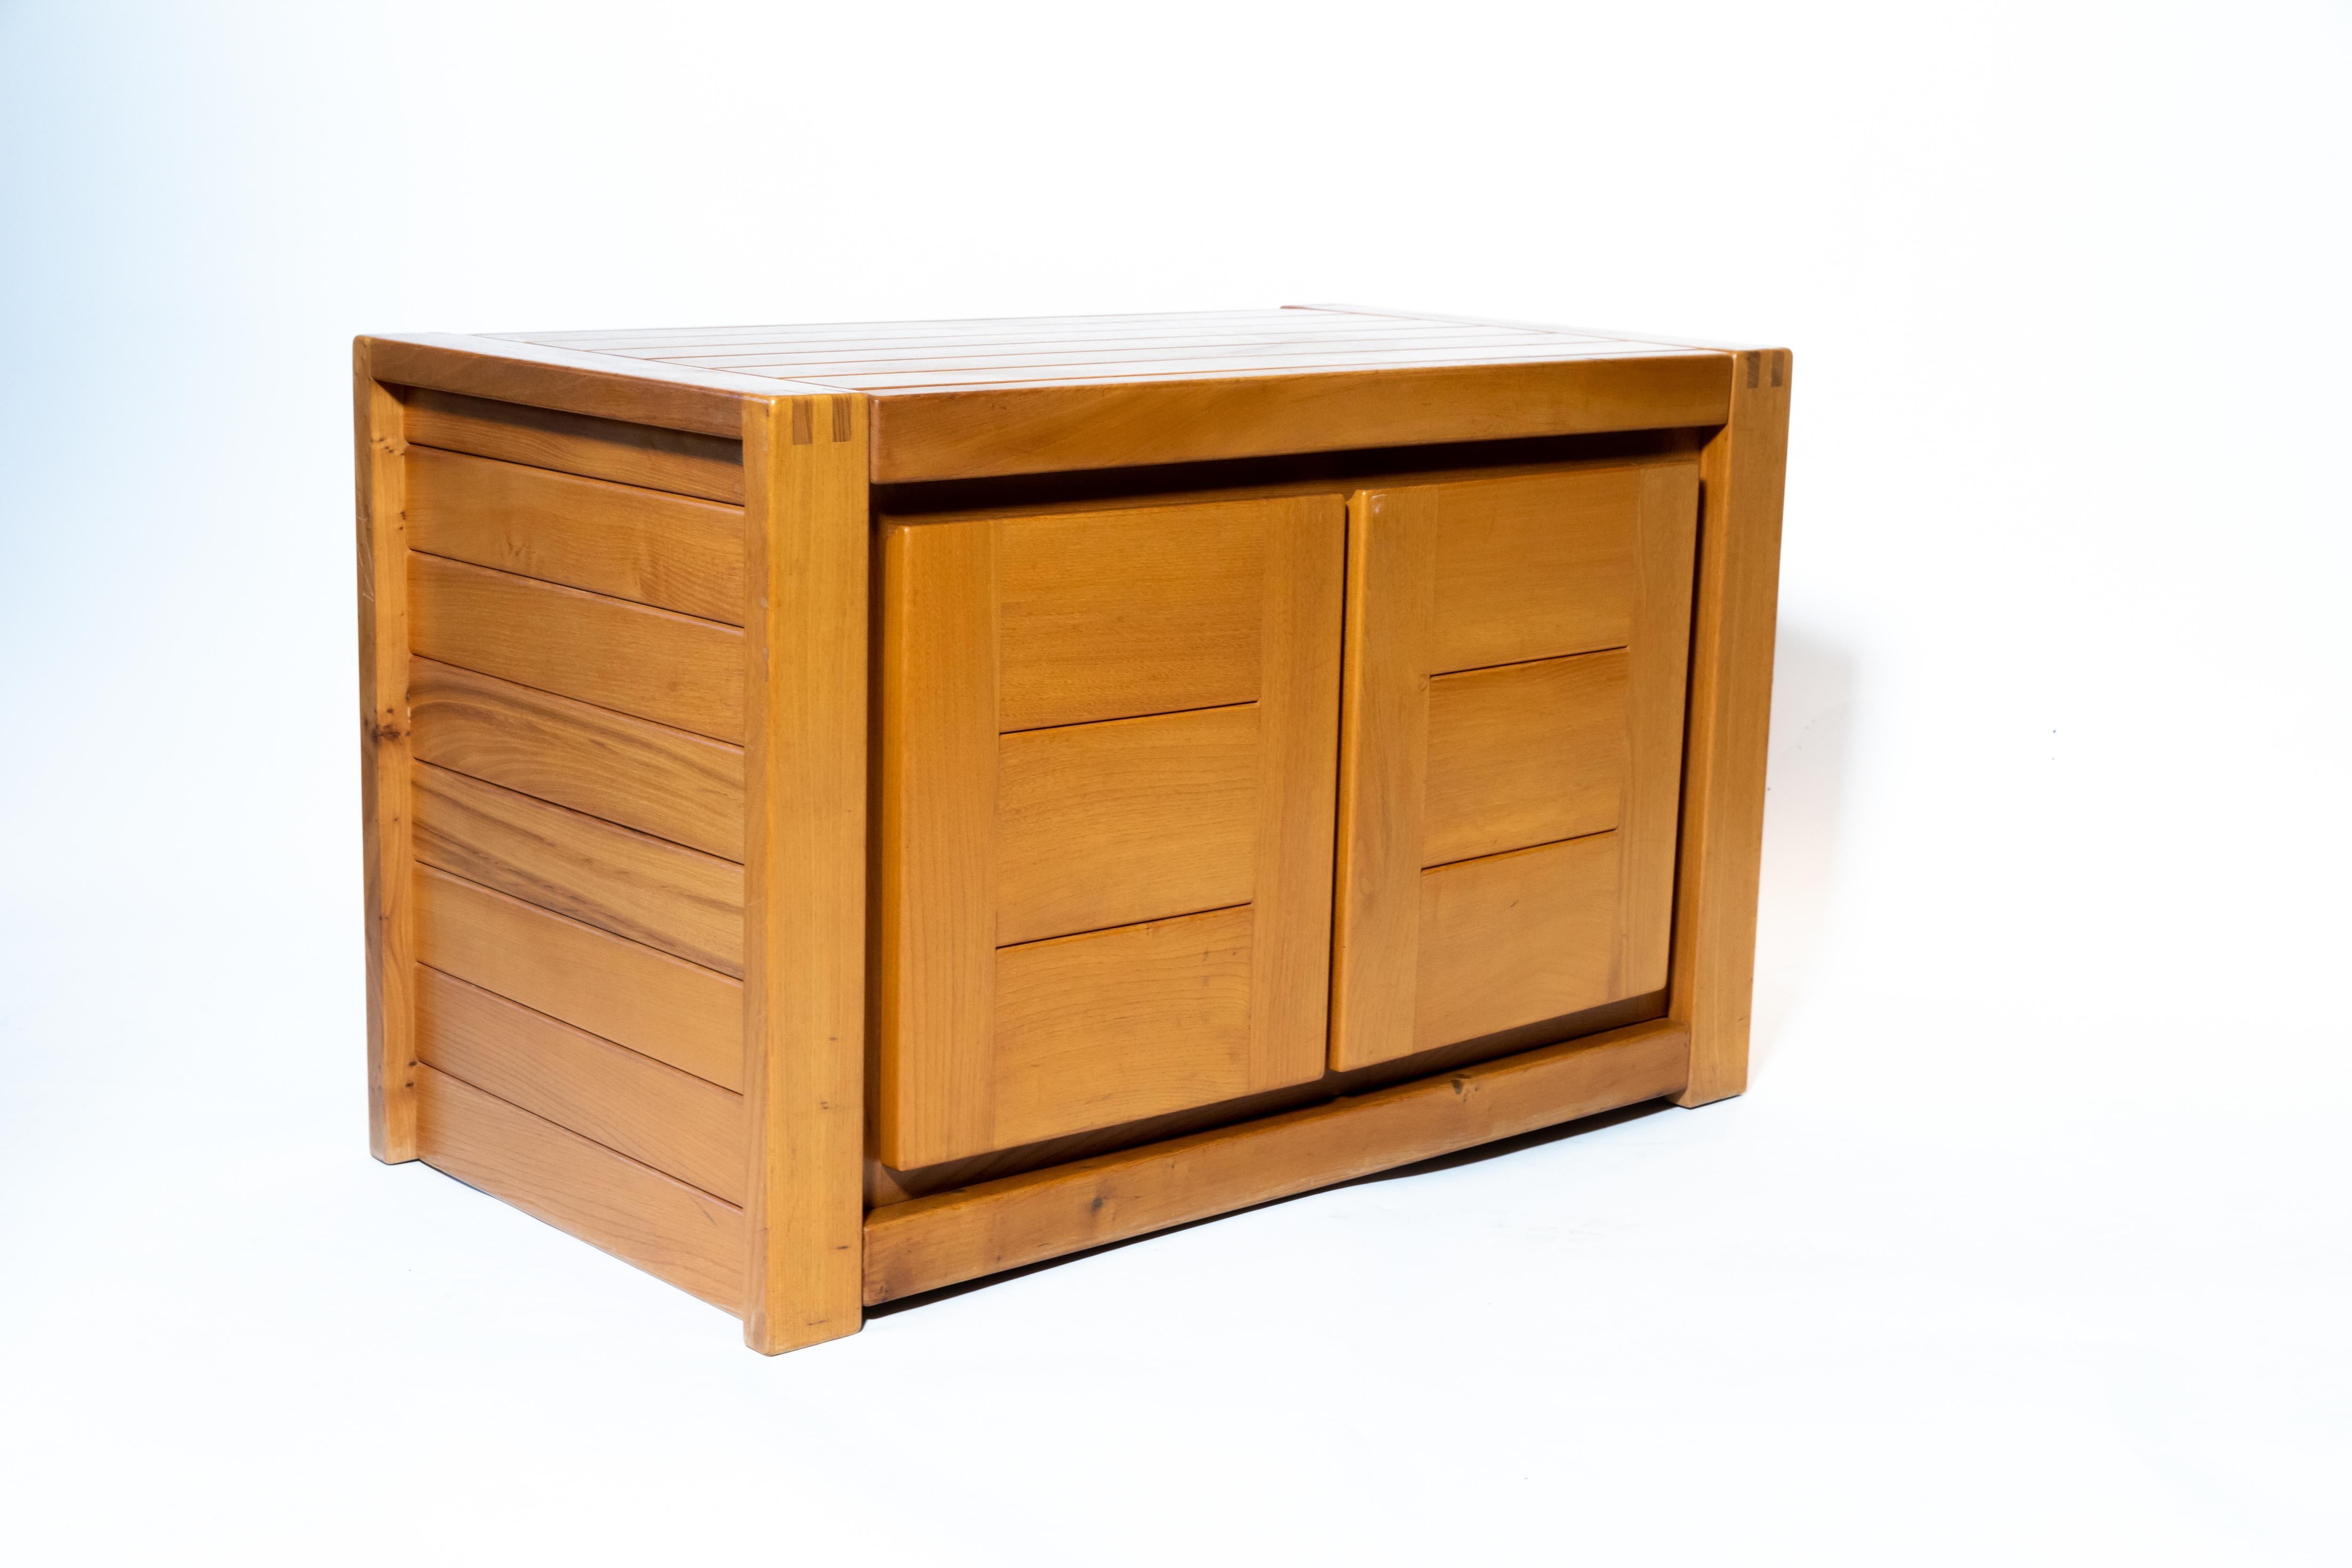 Small, smart chest by Pierre Chapo; the elm has a lovely warm tone. Would look great as a side table, or mounted on a wall.